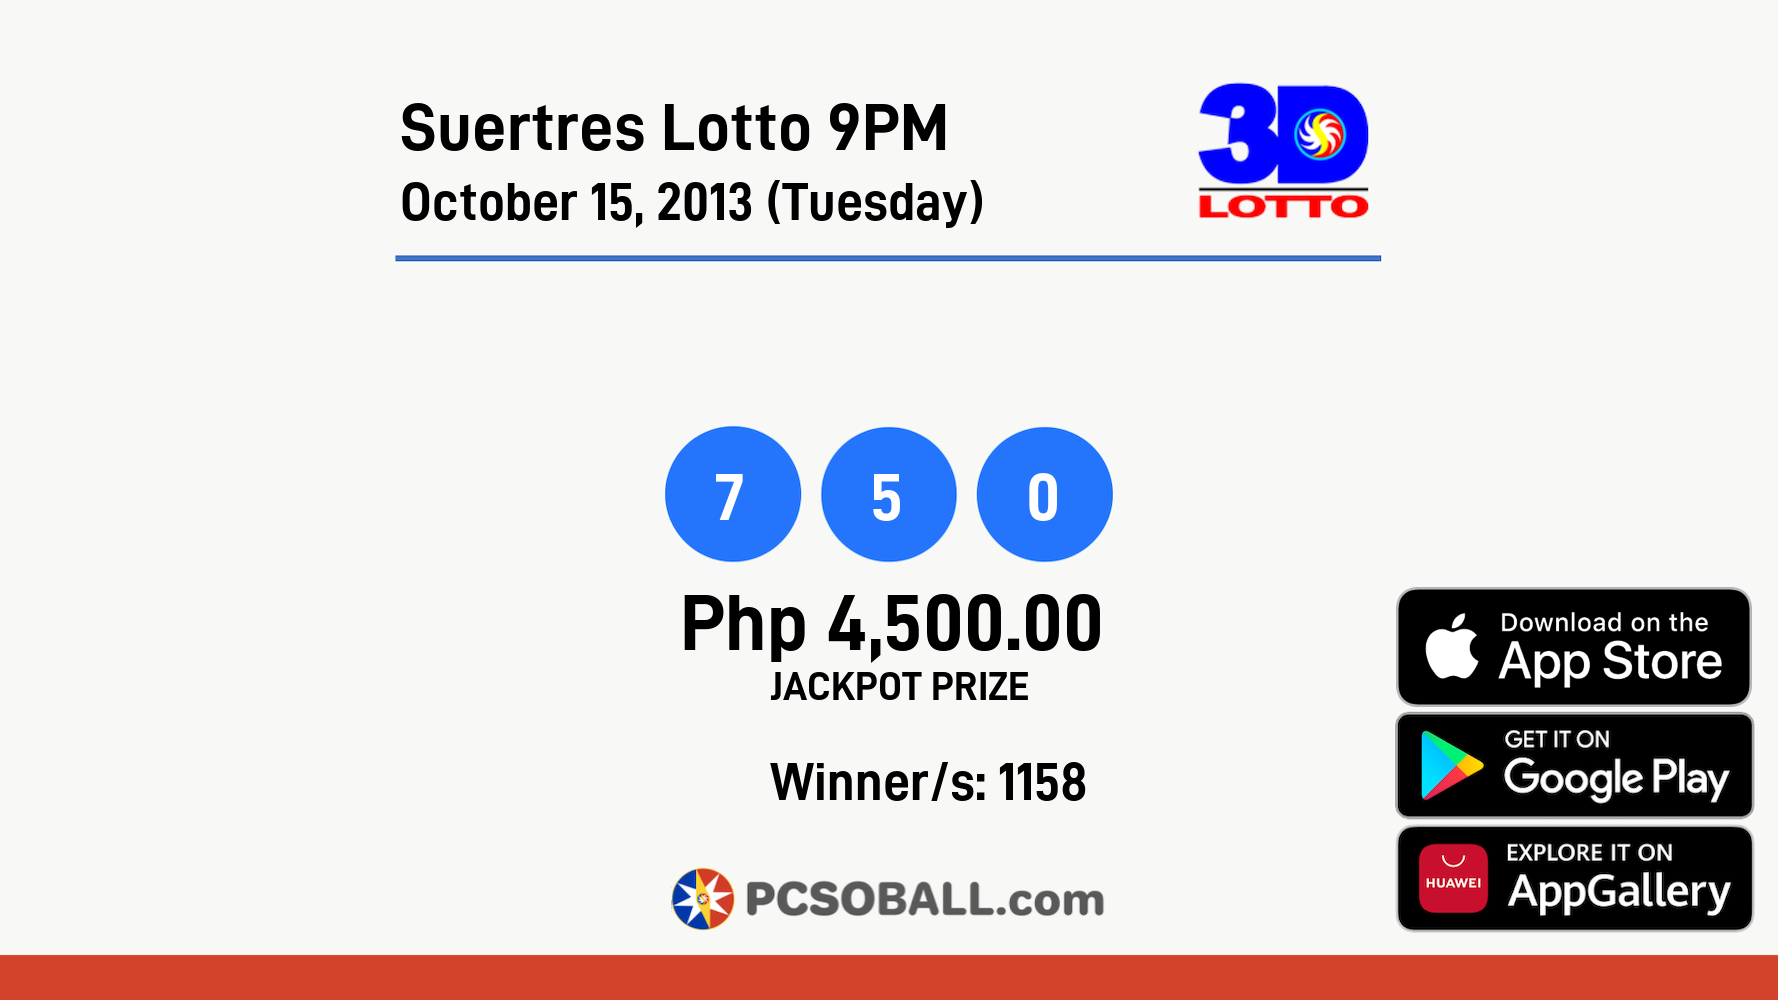 Suertres Lotto 9PM October 15, 2013 (Tuesday) Result